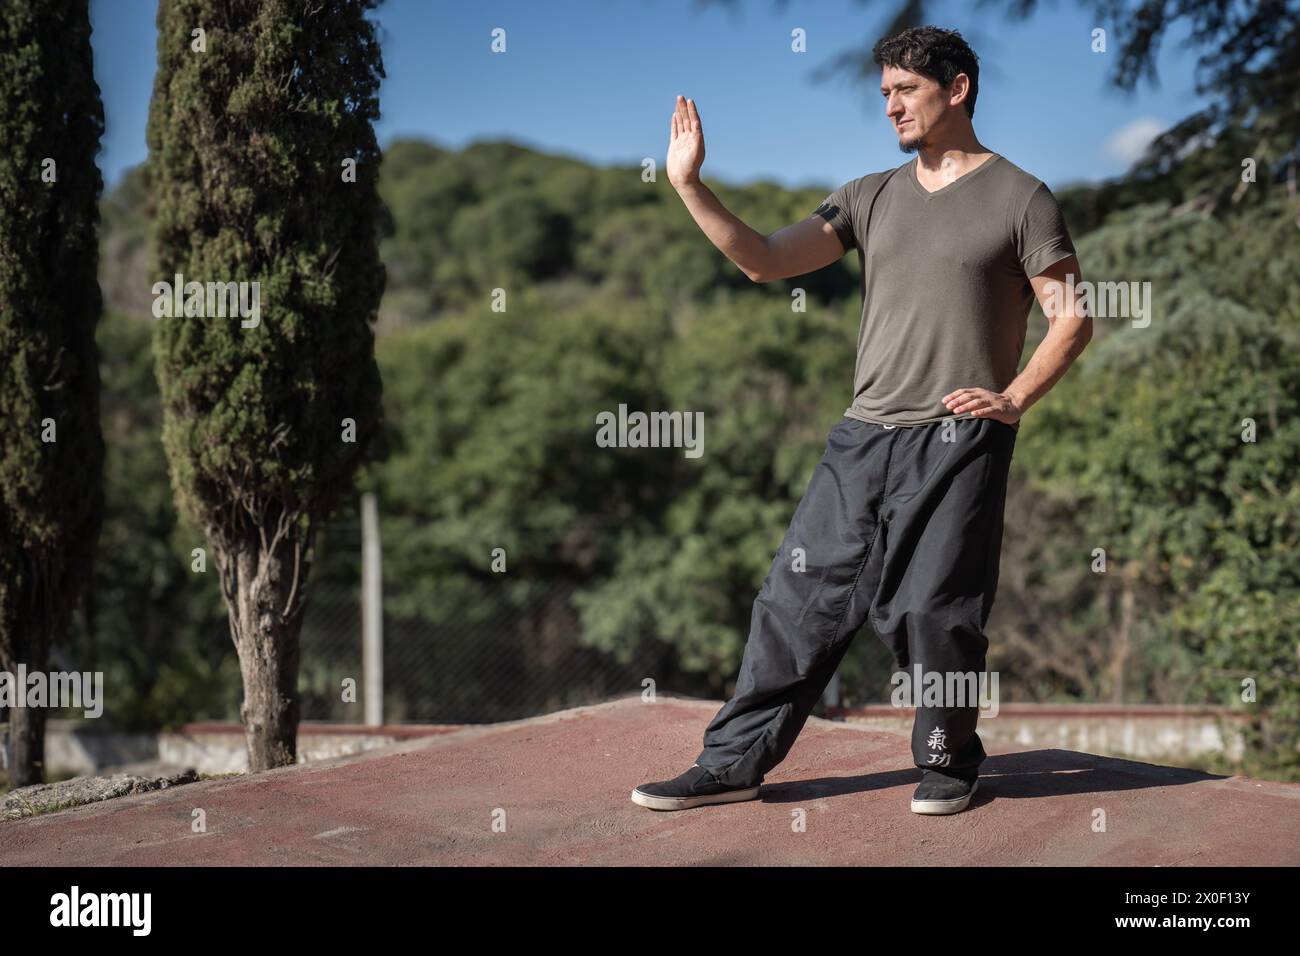 The third posture of the Bai Hu program, the static stance Santi Shi, focusing on pushing strength, being practiced outdoors by a man. Stock Photo